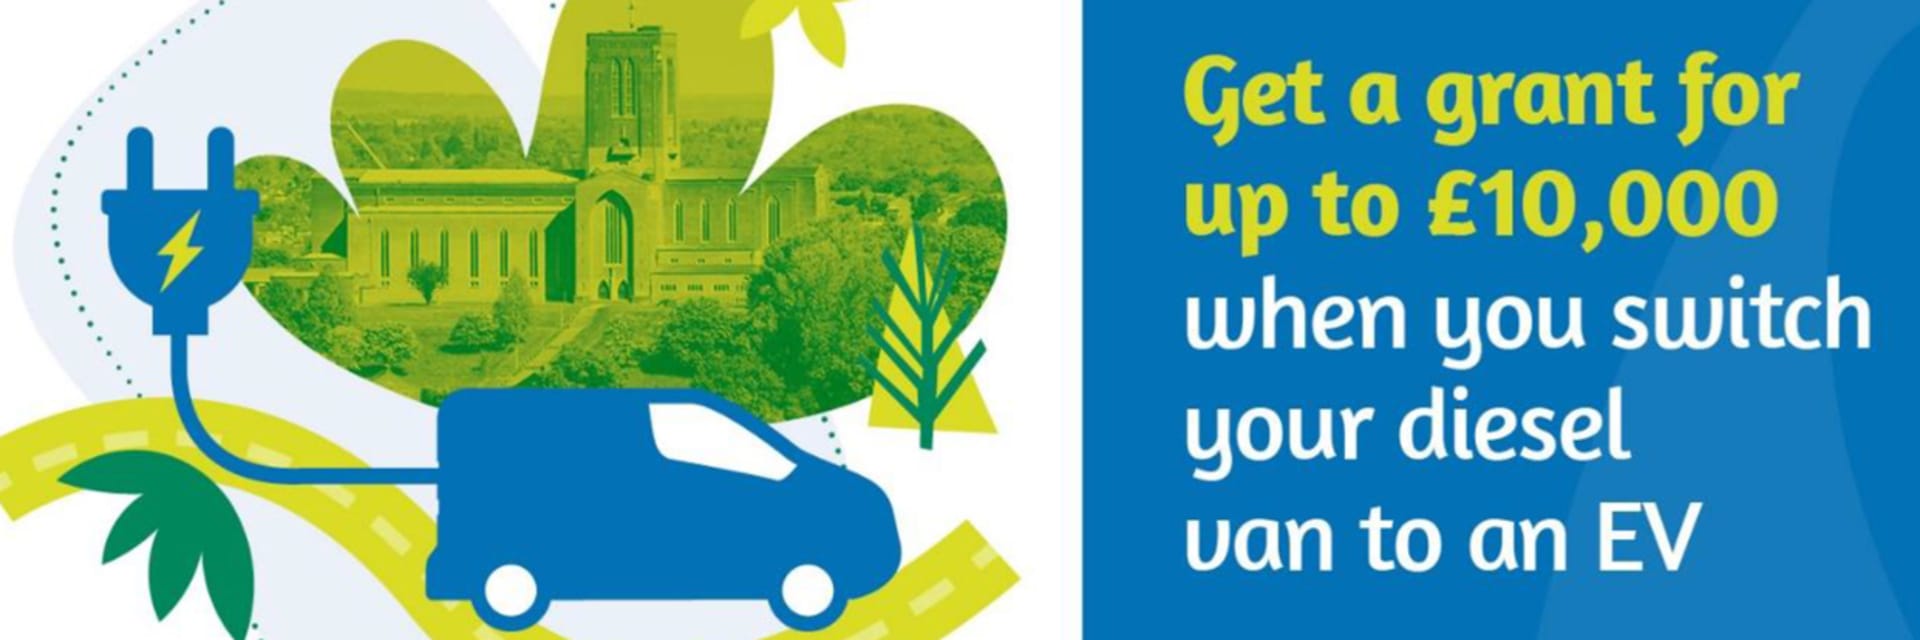 Get a grant for up to £10,000 when you switch your diesel van for an EV.